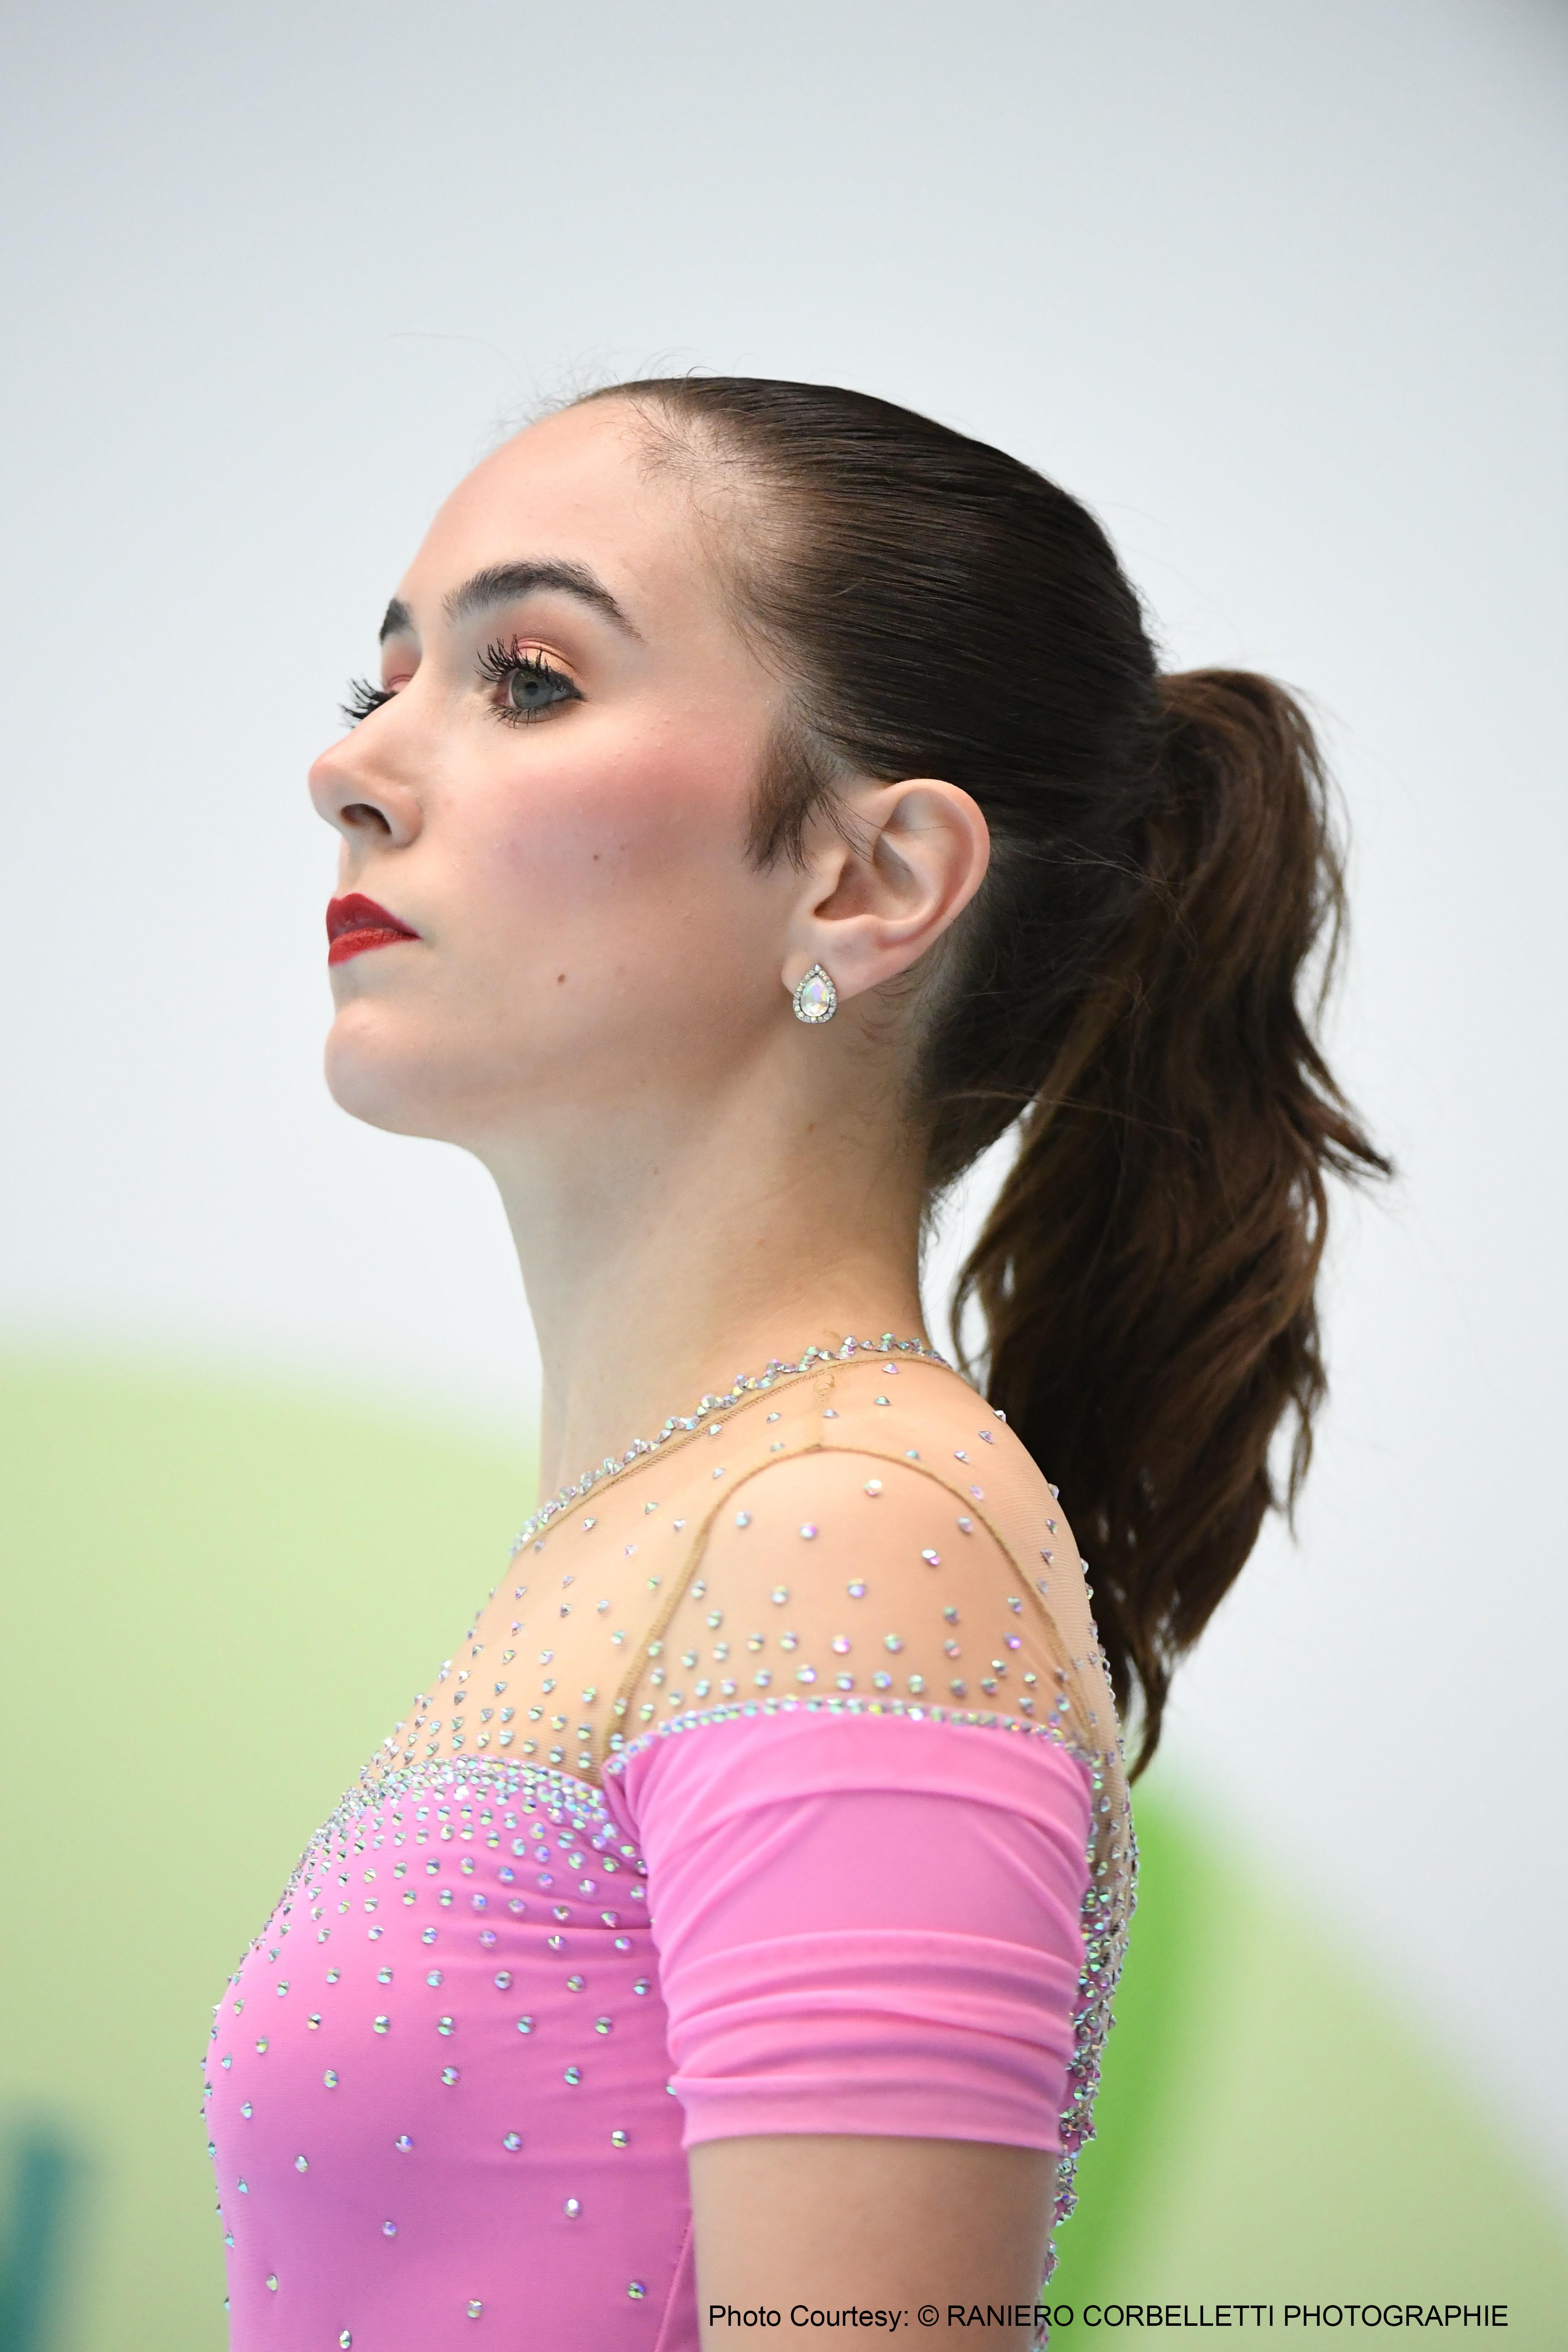 RANIE ROCORBELLETTI PHOTOGRAPHIE. Madison Kellis earned bronze at the 2021 Artistic Skating World Championship in Paraguay.